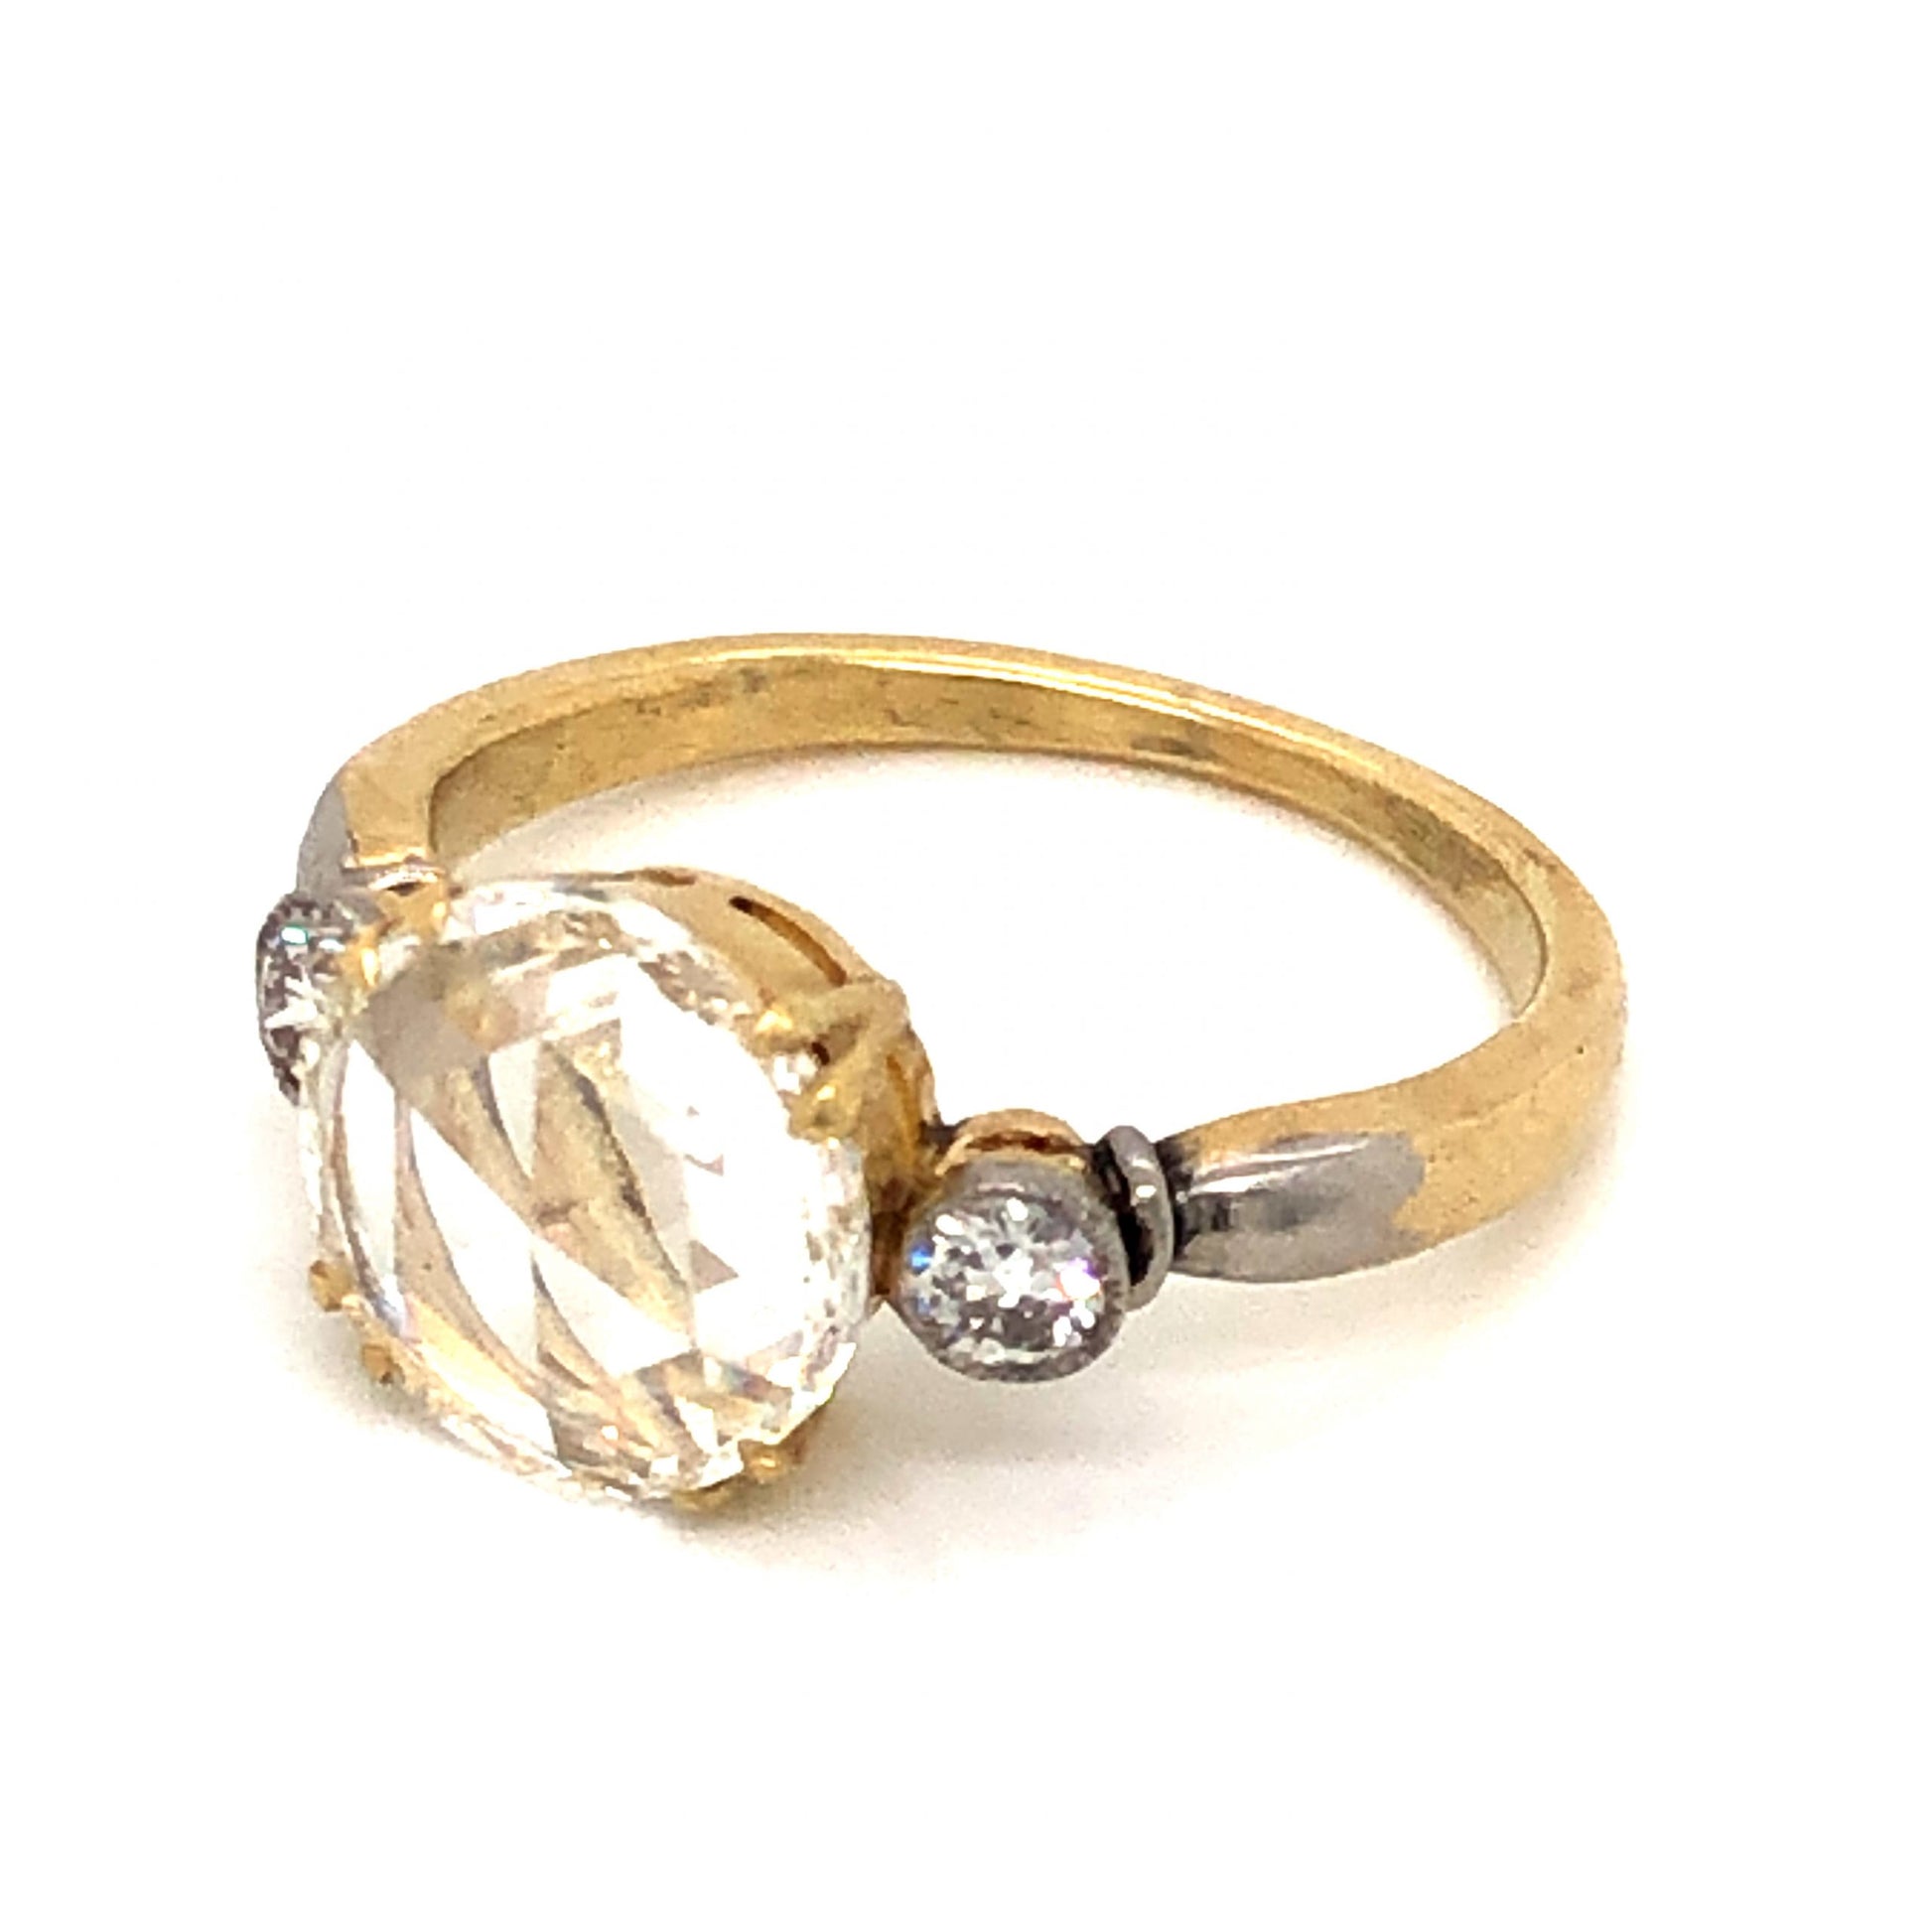 1.51 Victorian Rose Cut Diamond Engagement Ring in Yellow Gold